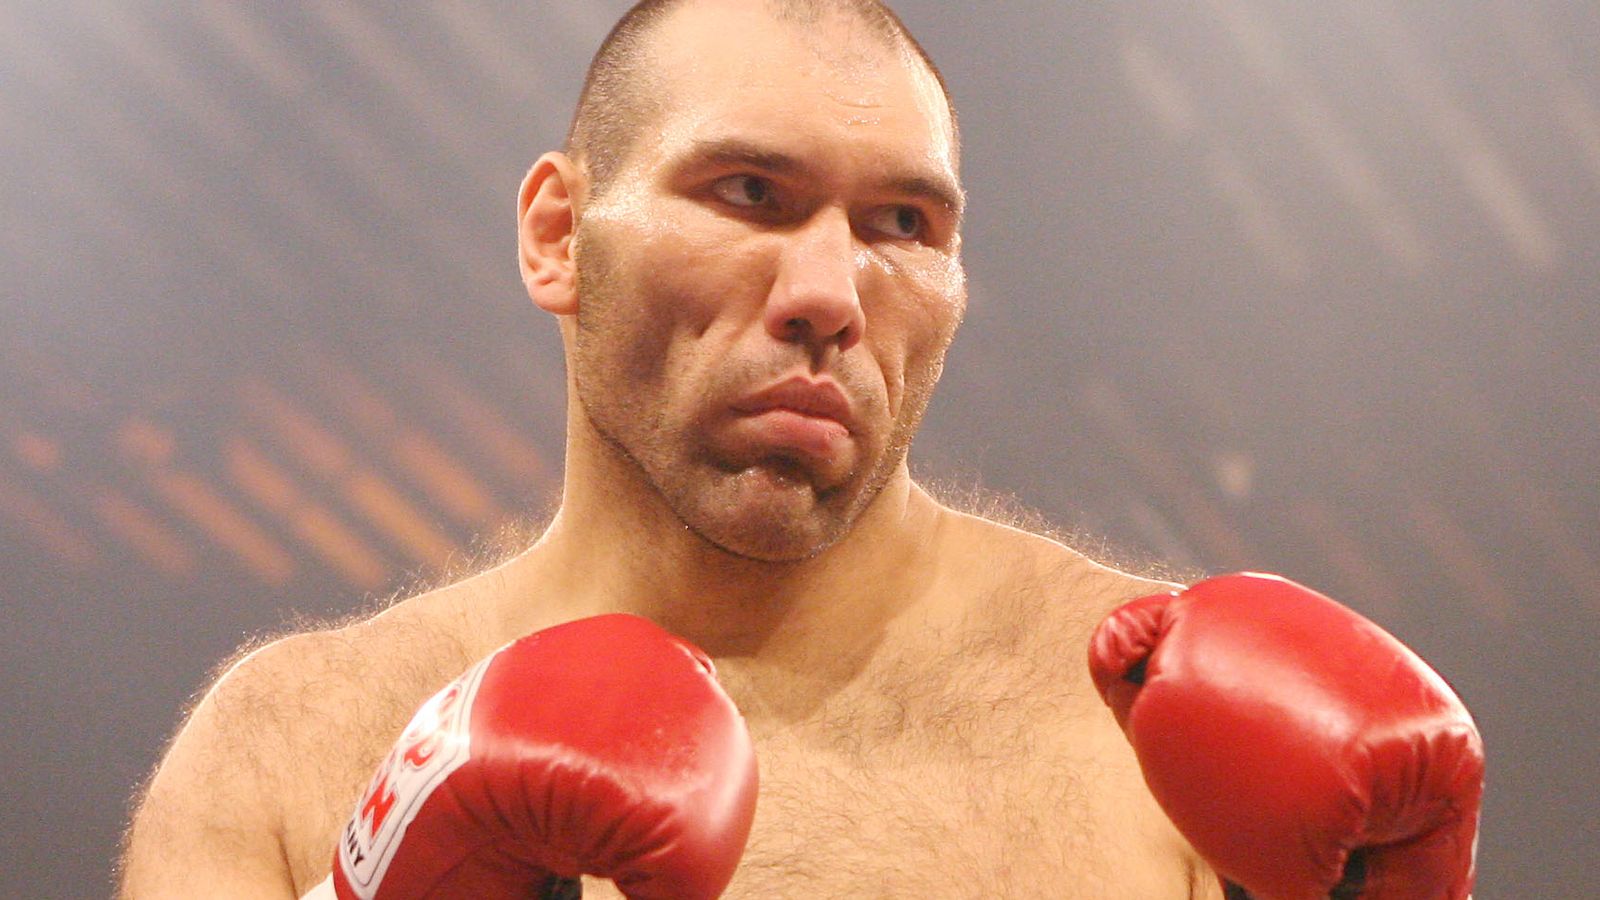 Nikolai Valuev Biggest-ever heavyweight champ was gentle giant stuck with ogre image Boxing News Sky Sports